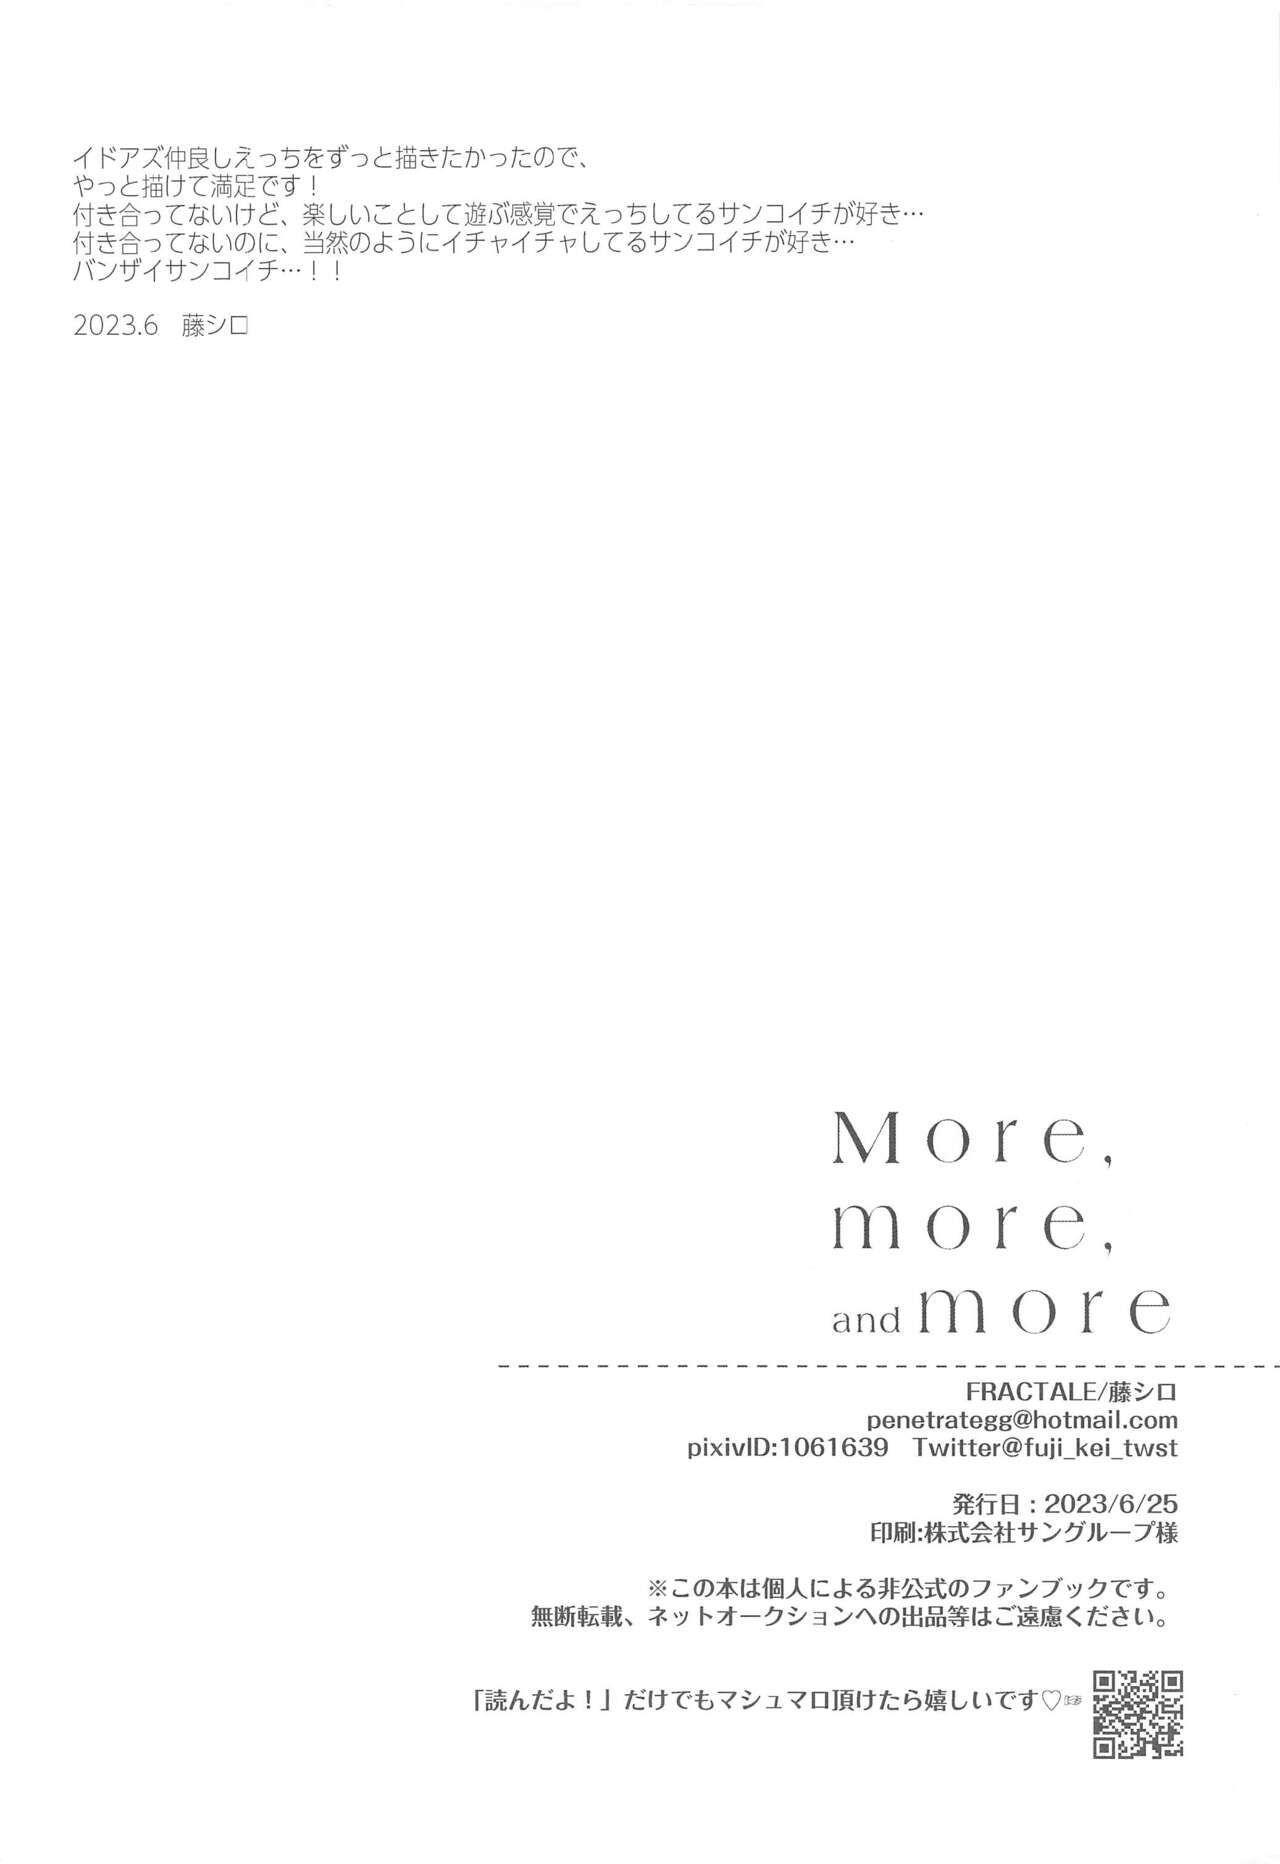 More, more, and more - Foto 23